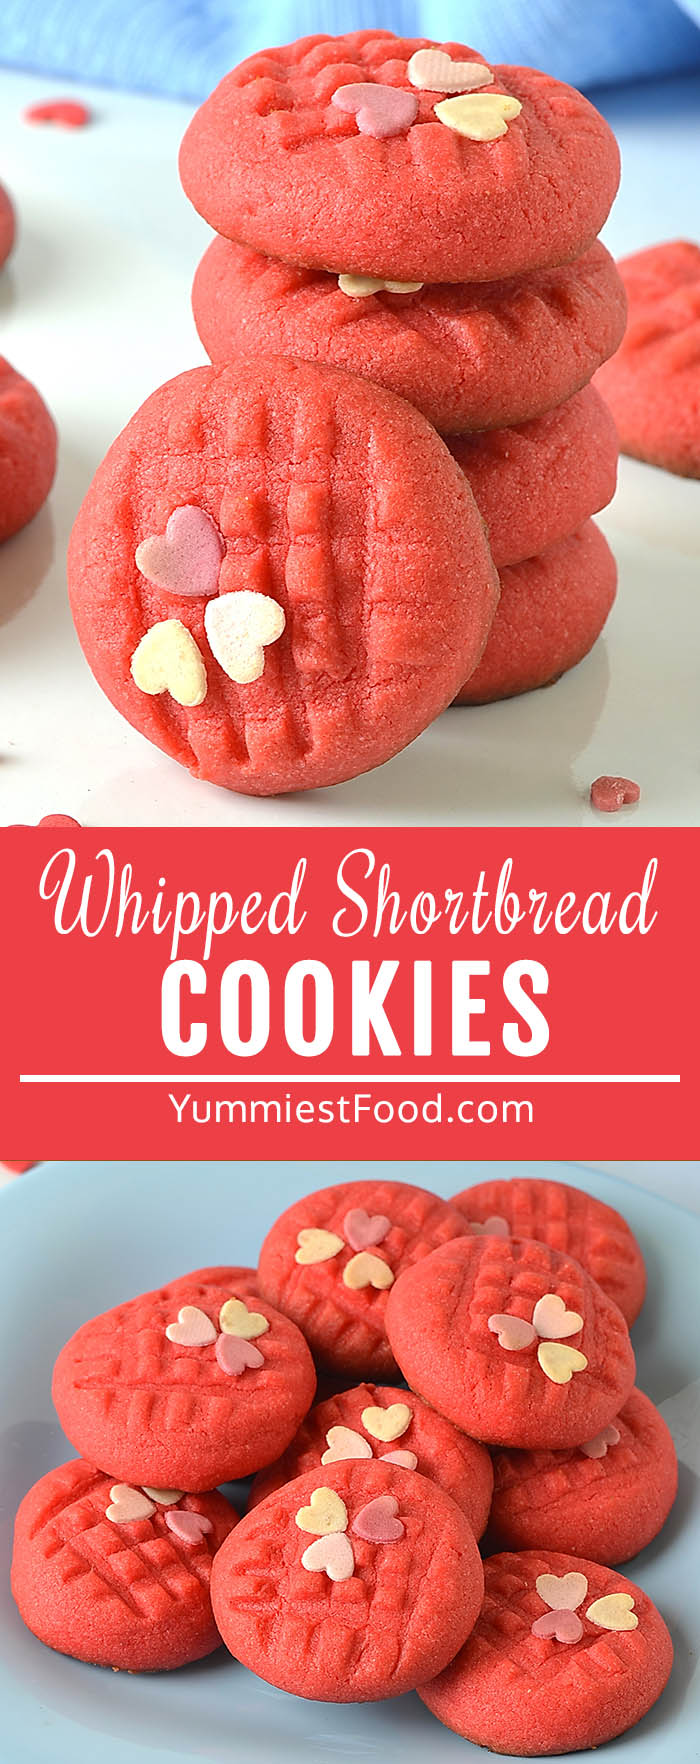 Valentineˈs Whipped Shortbread Cookies are so easy to make with just a few ingredients and taste amazing! Light and tender cookies that melt in your mouth and can be easily decorated for Valentineˈs Day!